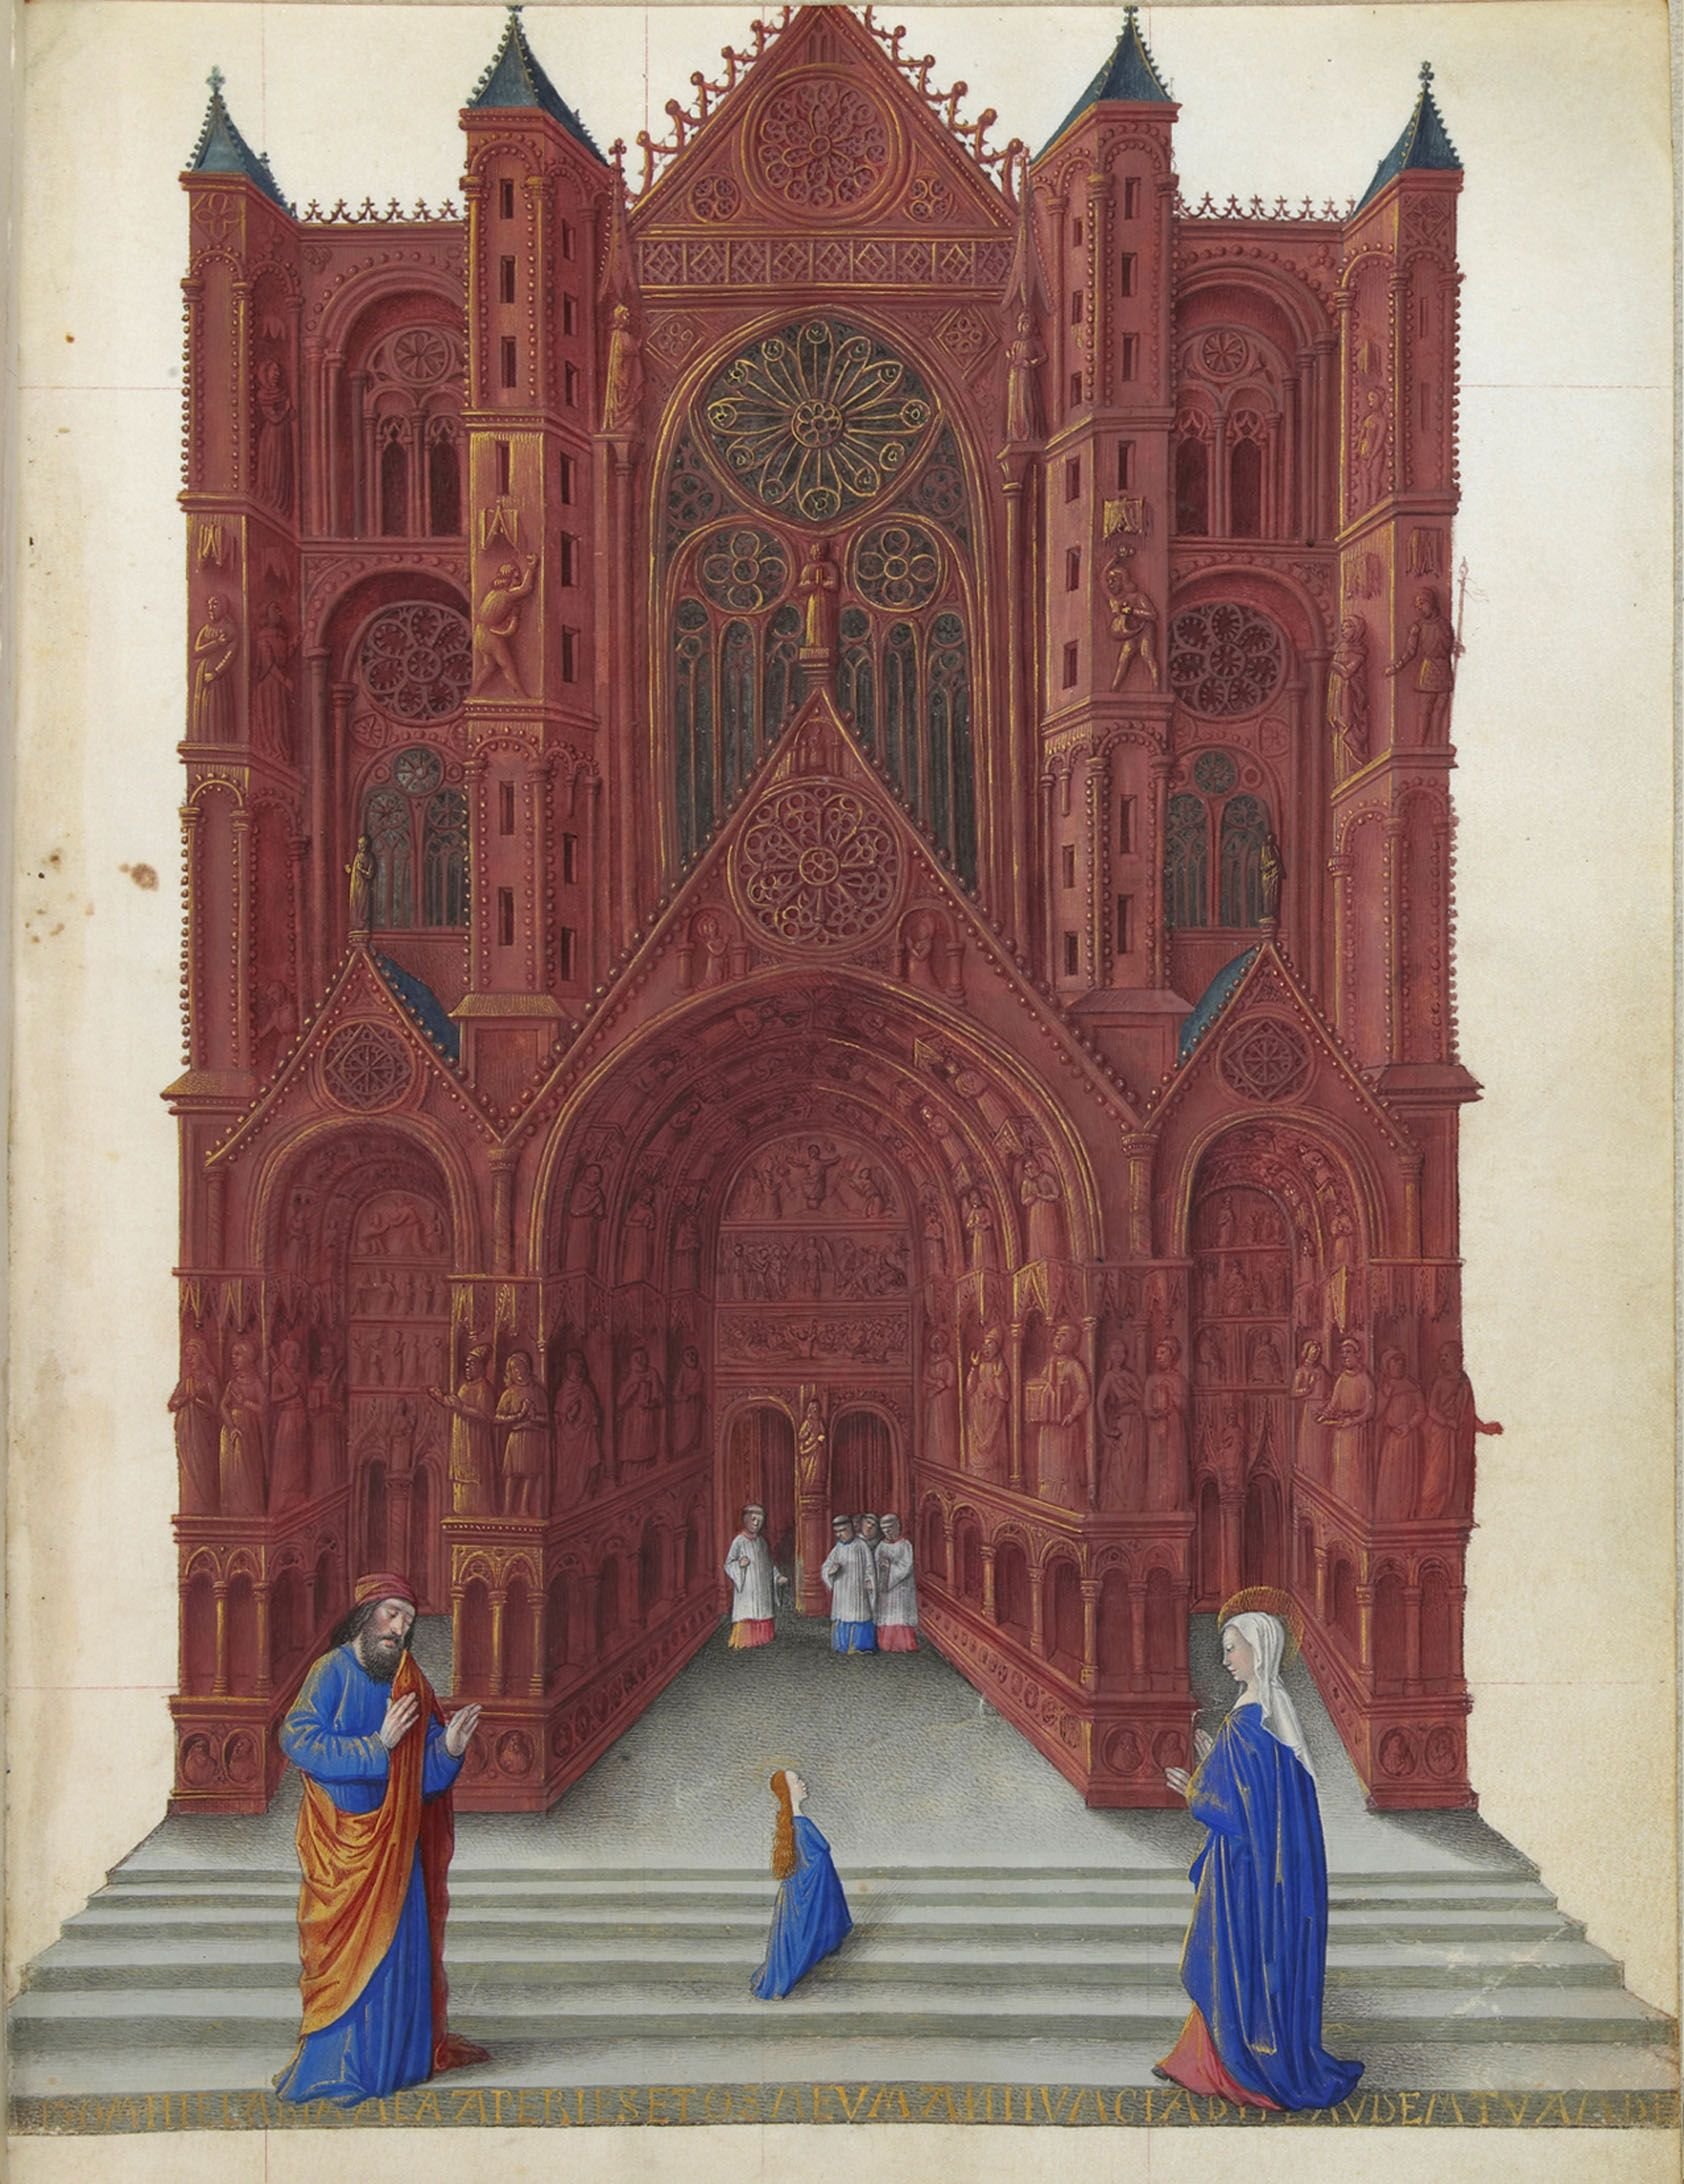 3. Limbourg Brothers - The Presentation of the Virgin